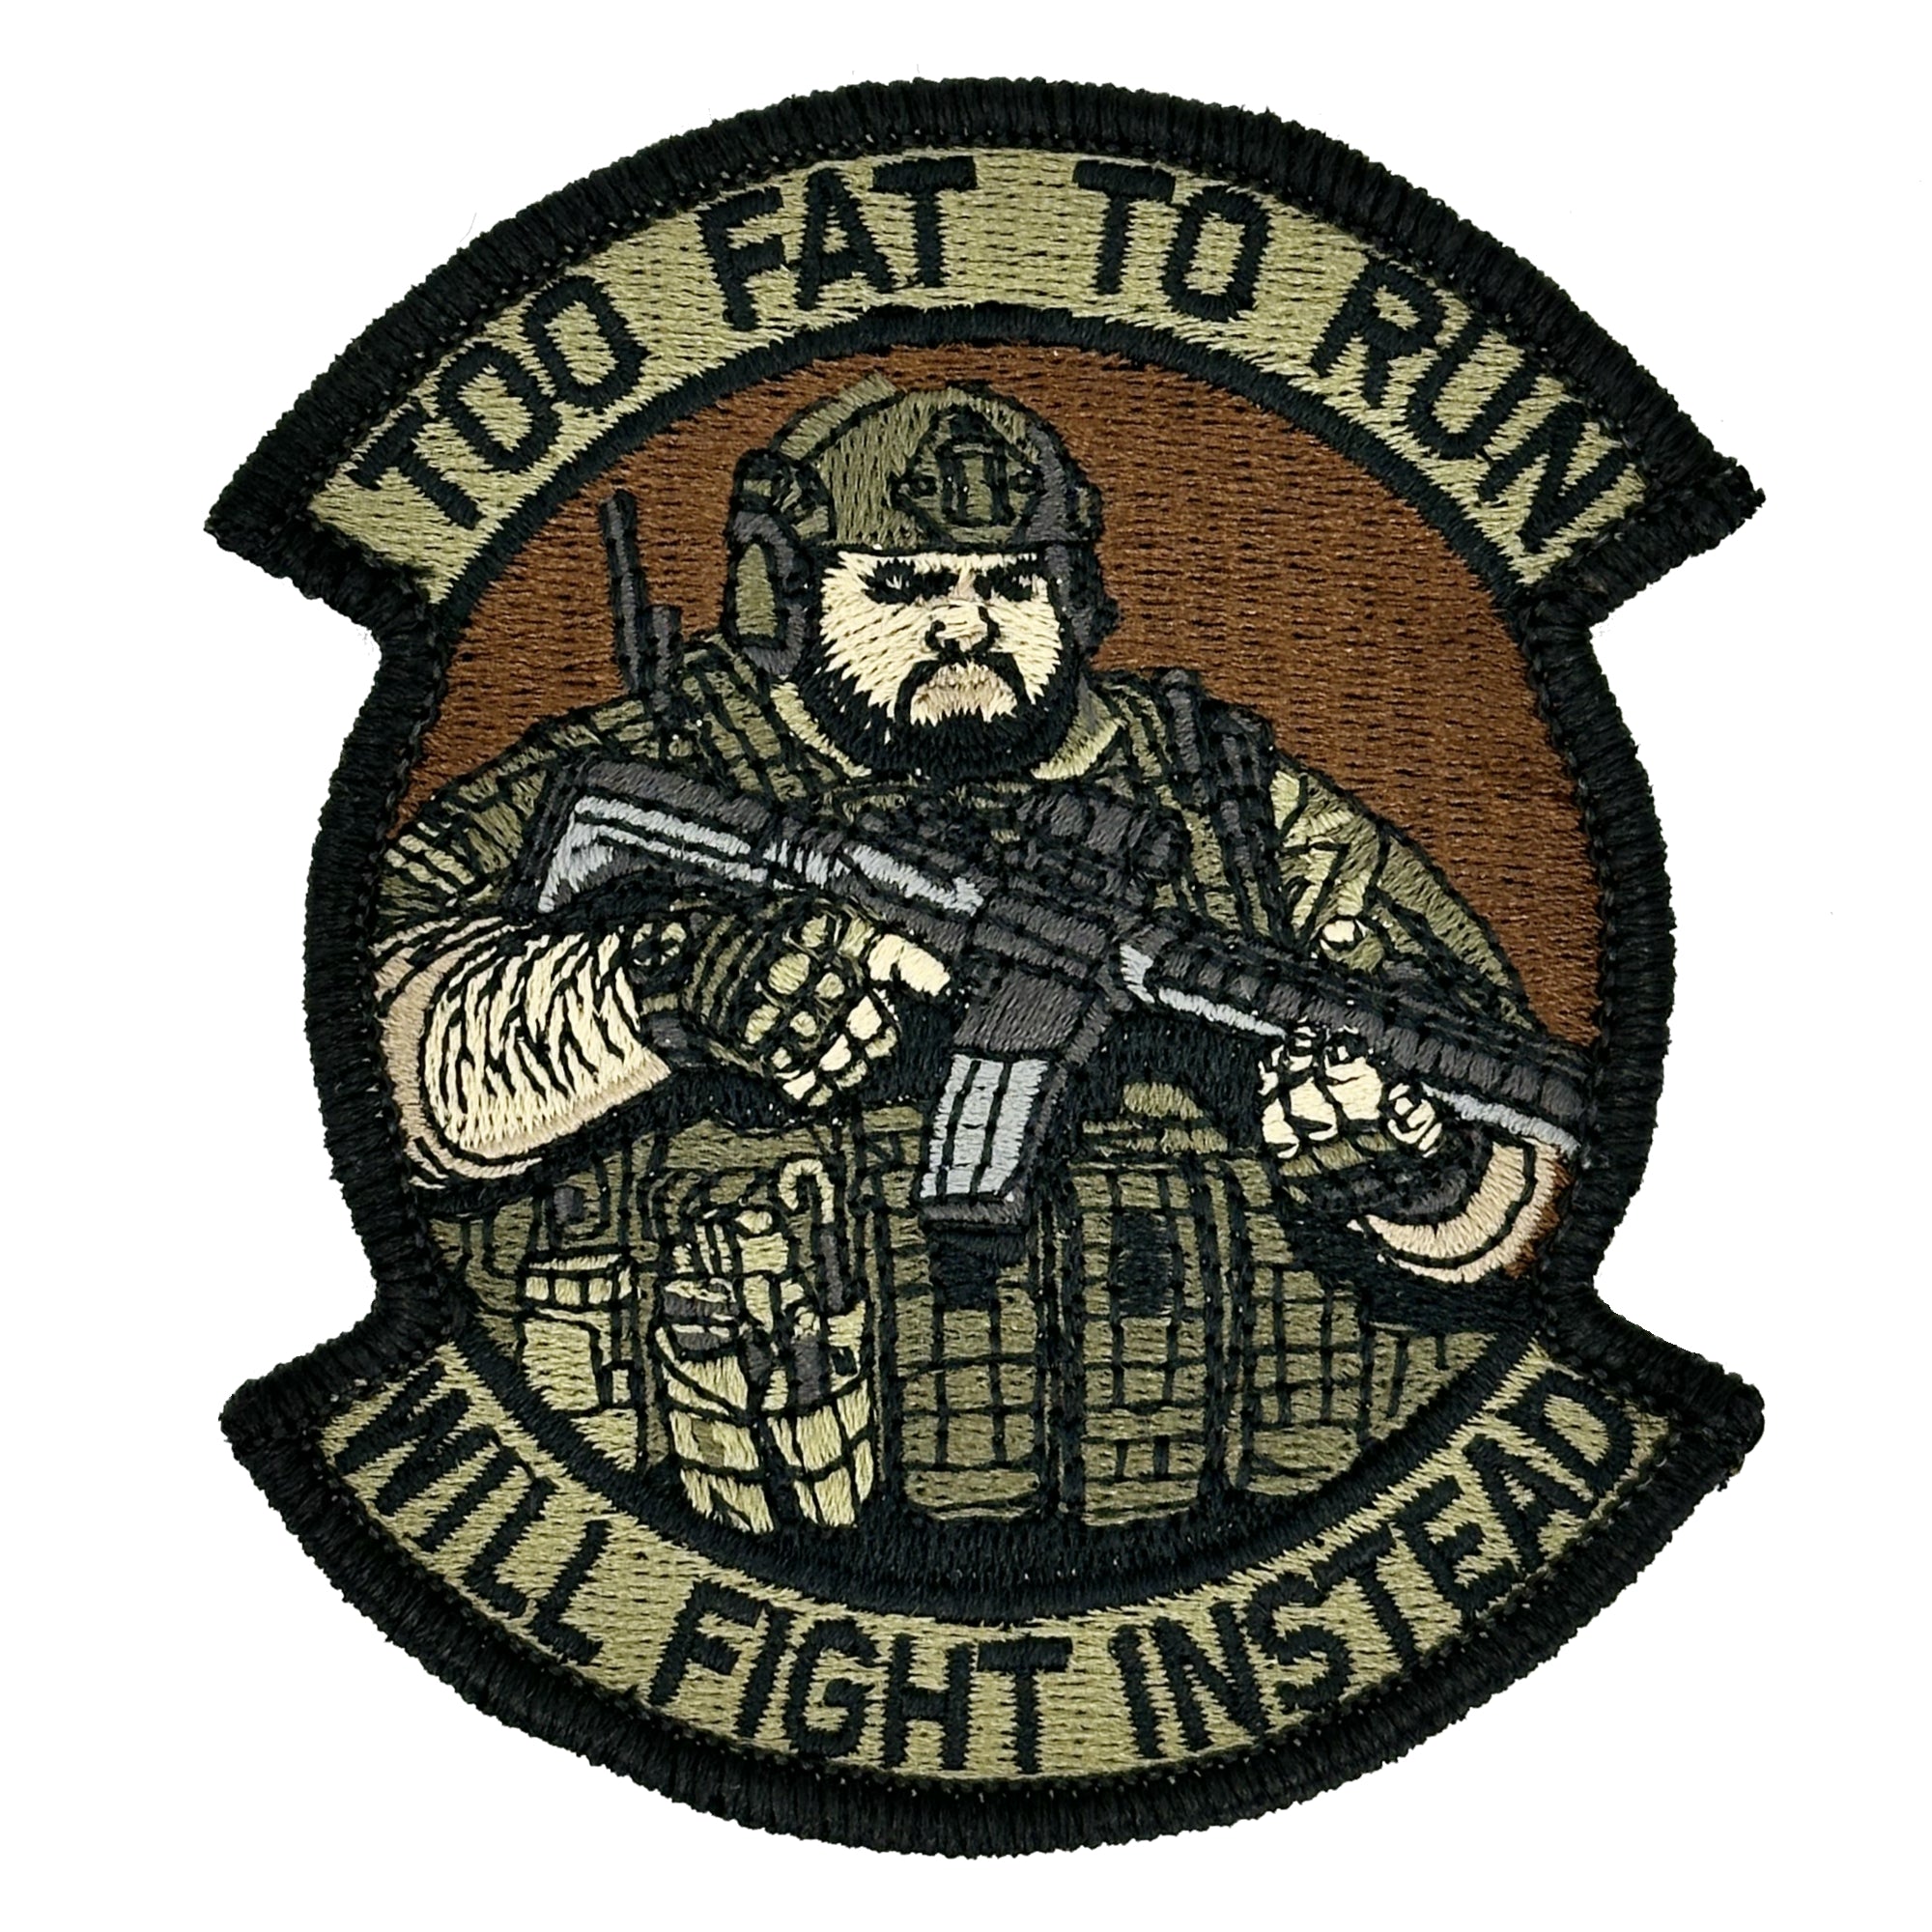 June 2024 POTM - 'Fat Father' - OCP Tactical "Too Fat to Run - Will Fight Instead" 4" Patch